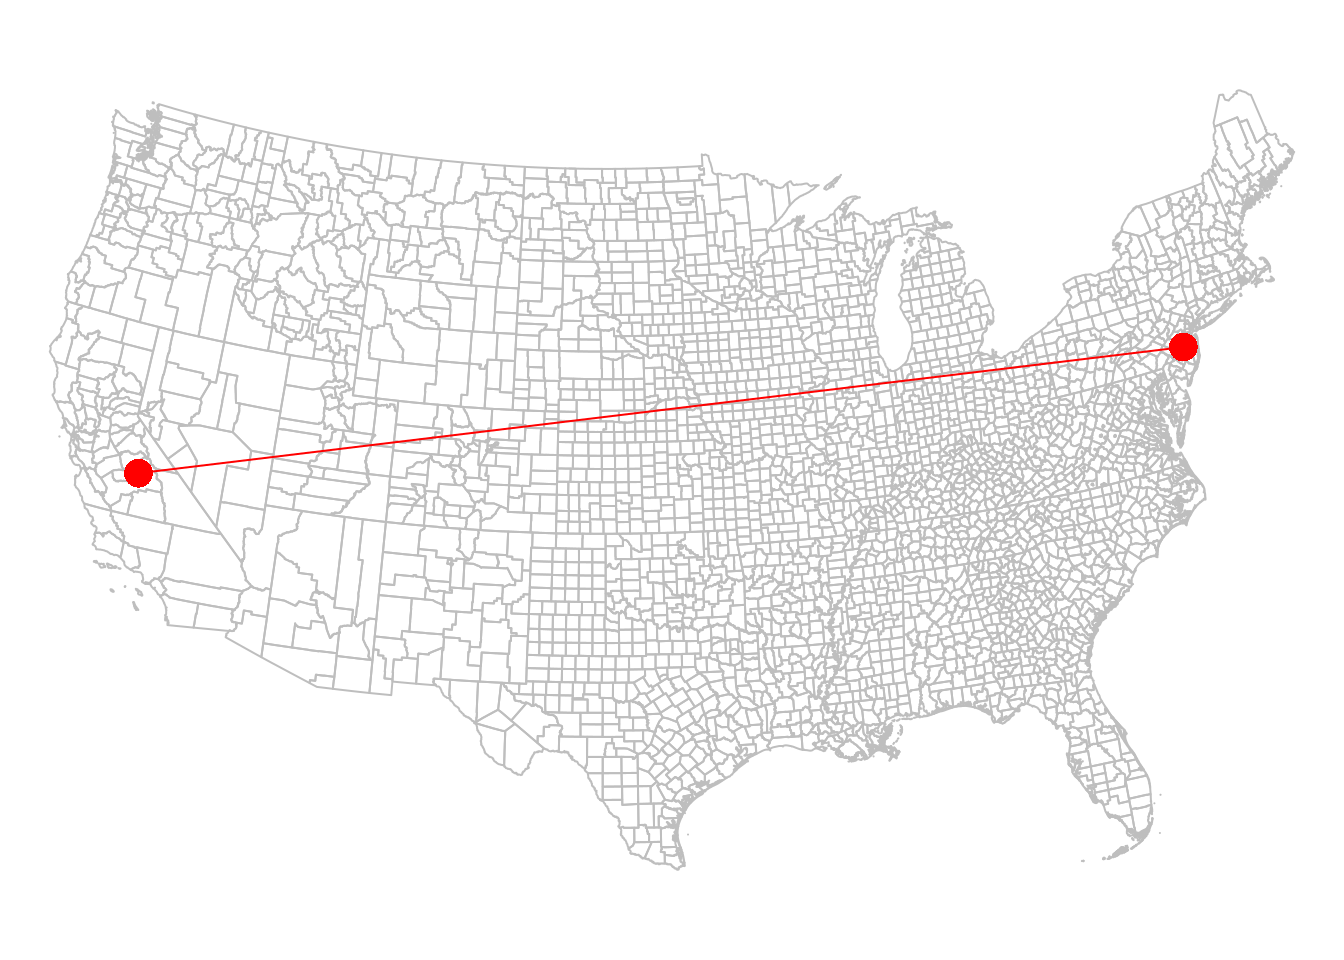 California and New Jersey centroids, with a line